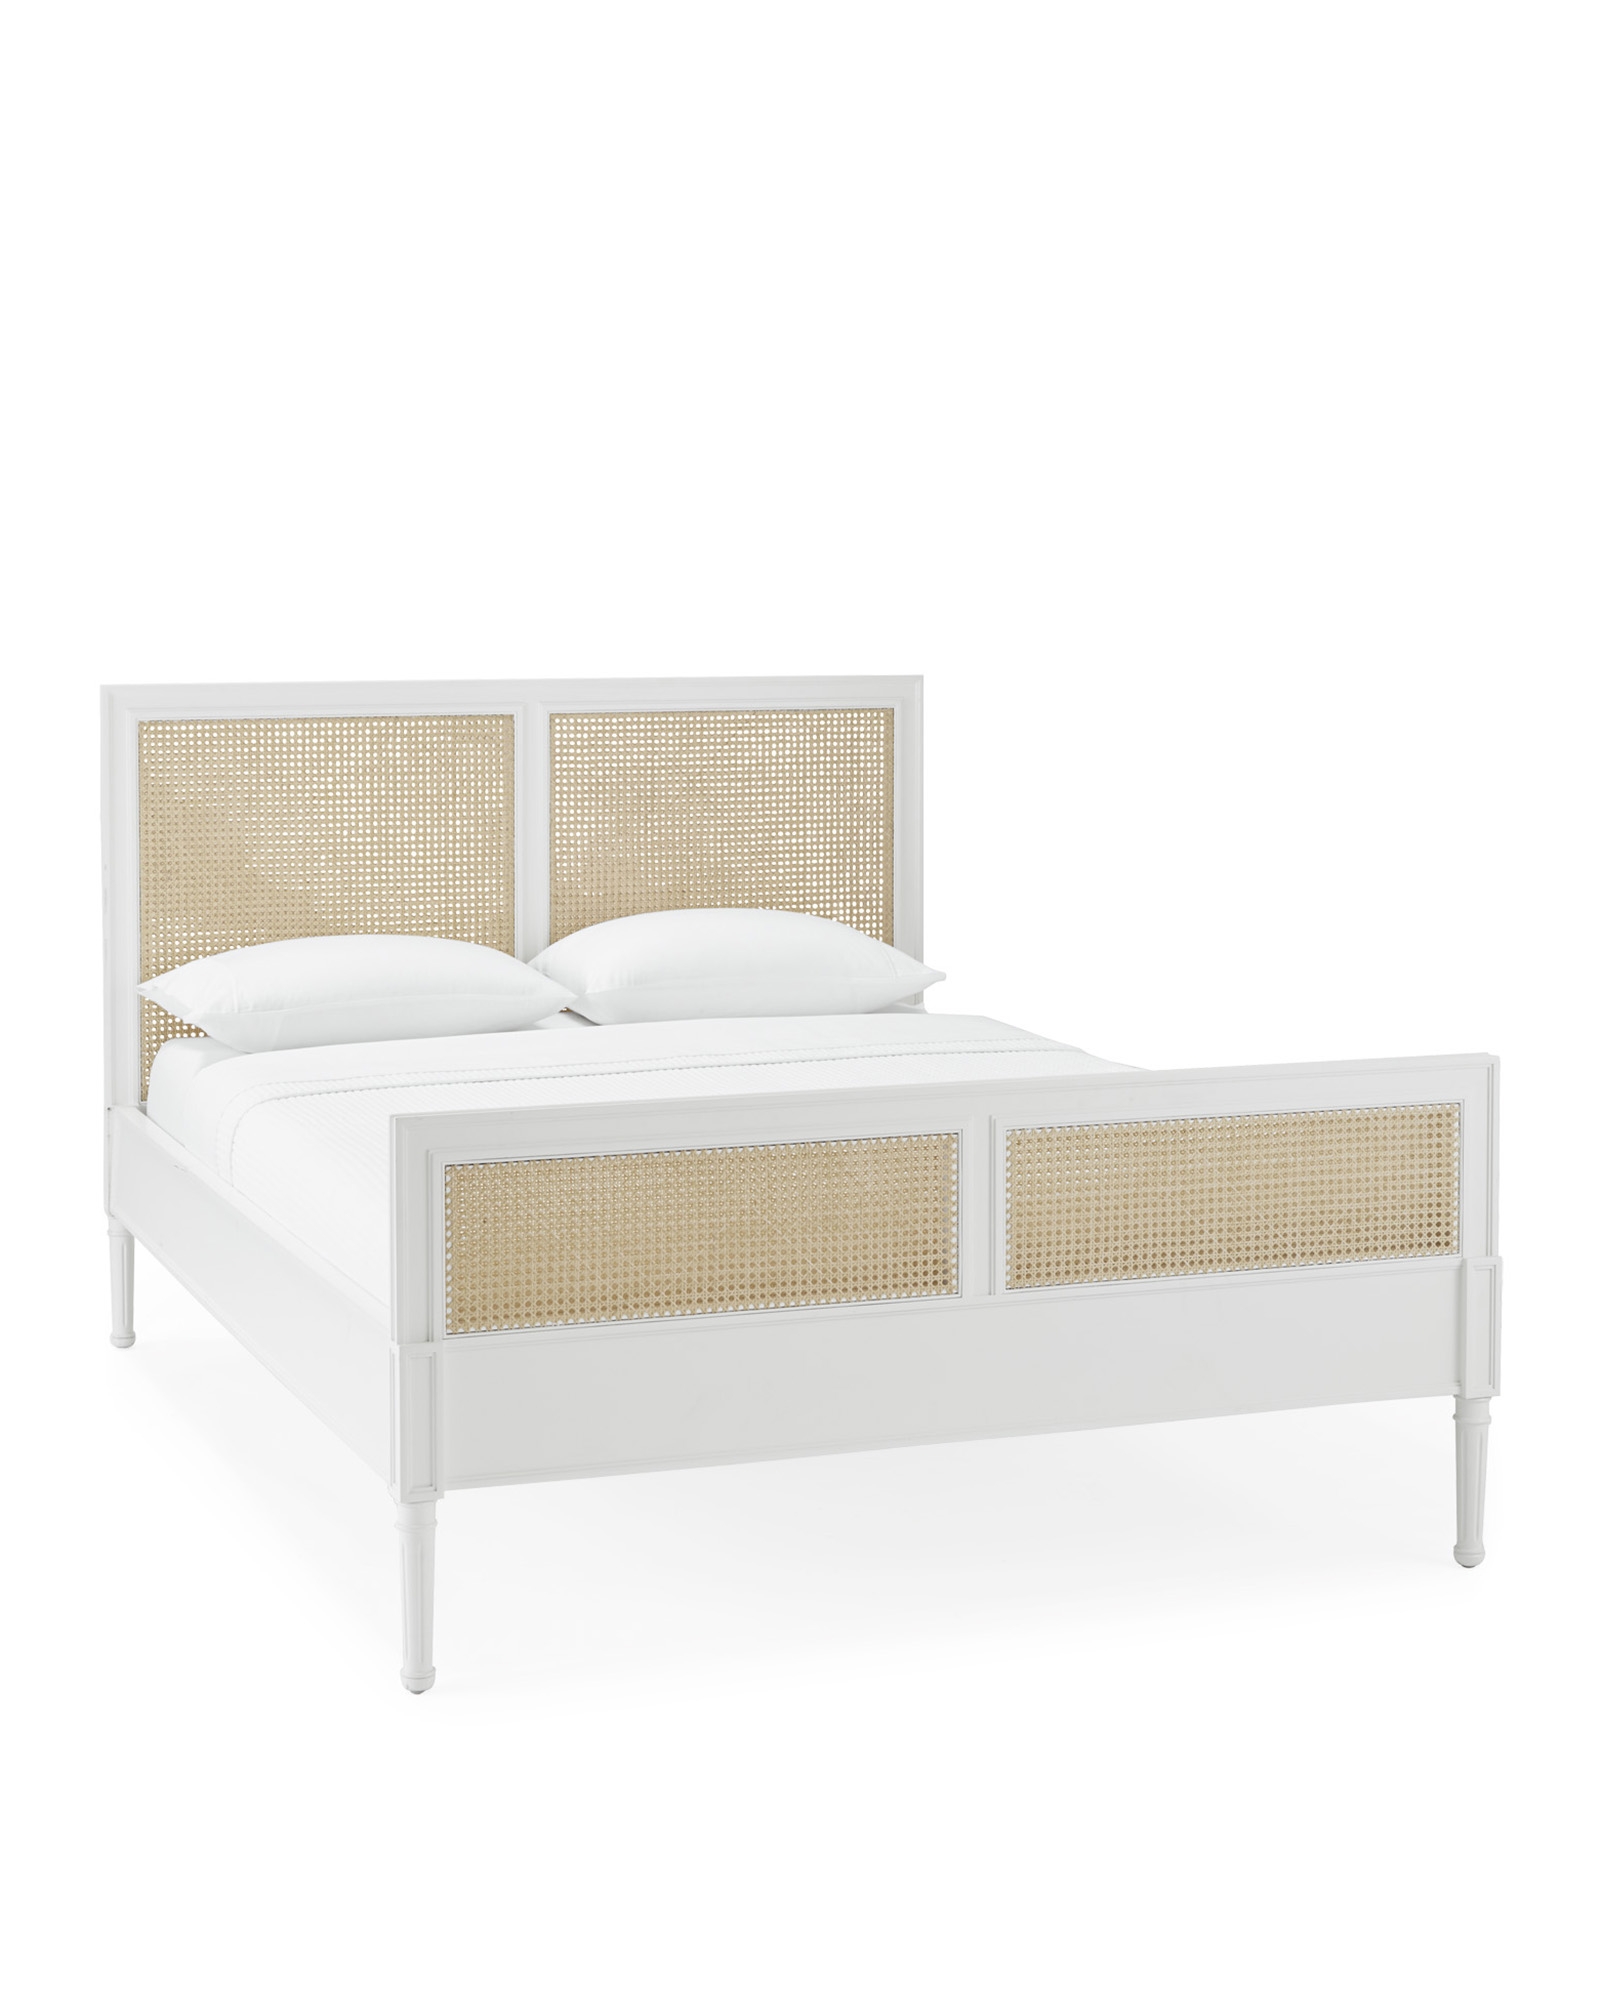 Harbour Cane Queen Bed - White - Image 0